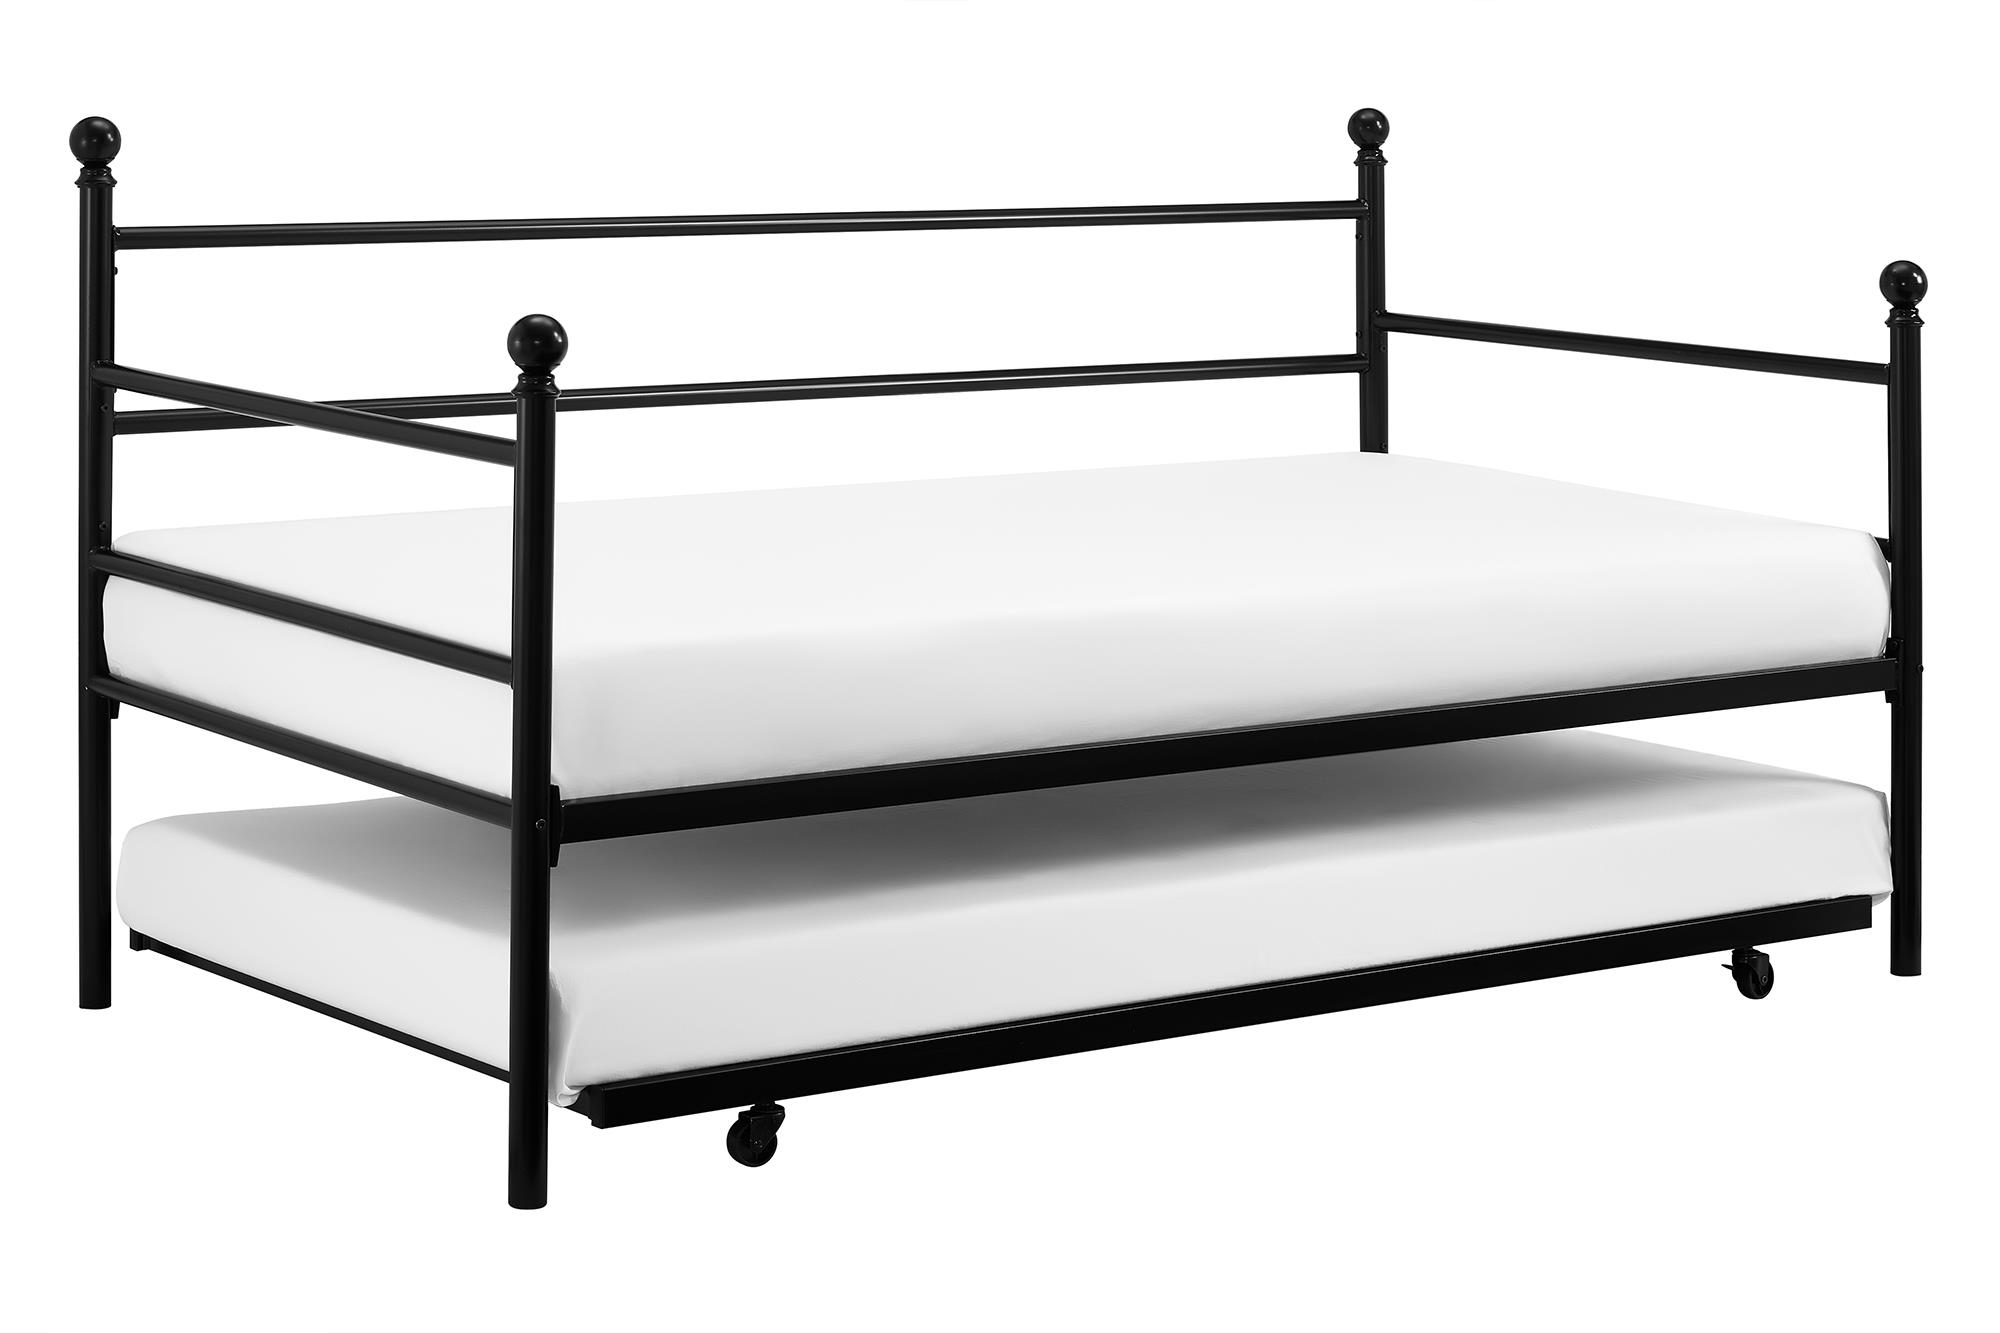 Mainstays Modern Metal Daybed with Trundle, Twin Size Frame, Black - image 4 of 18